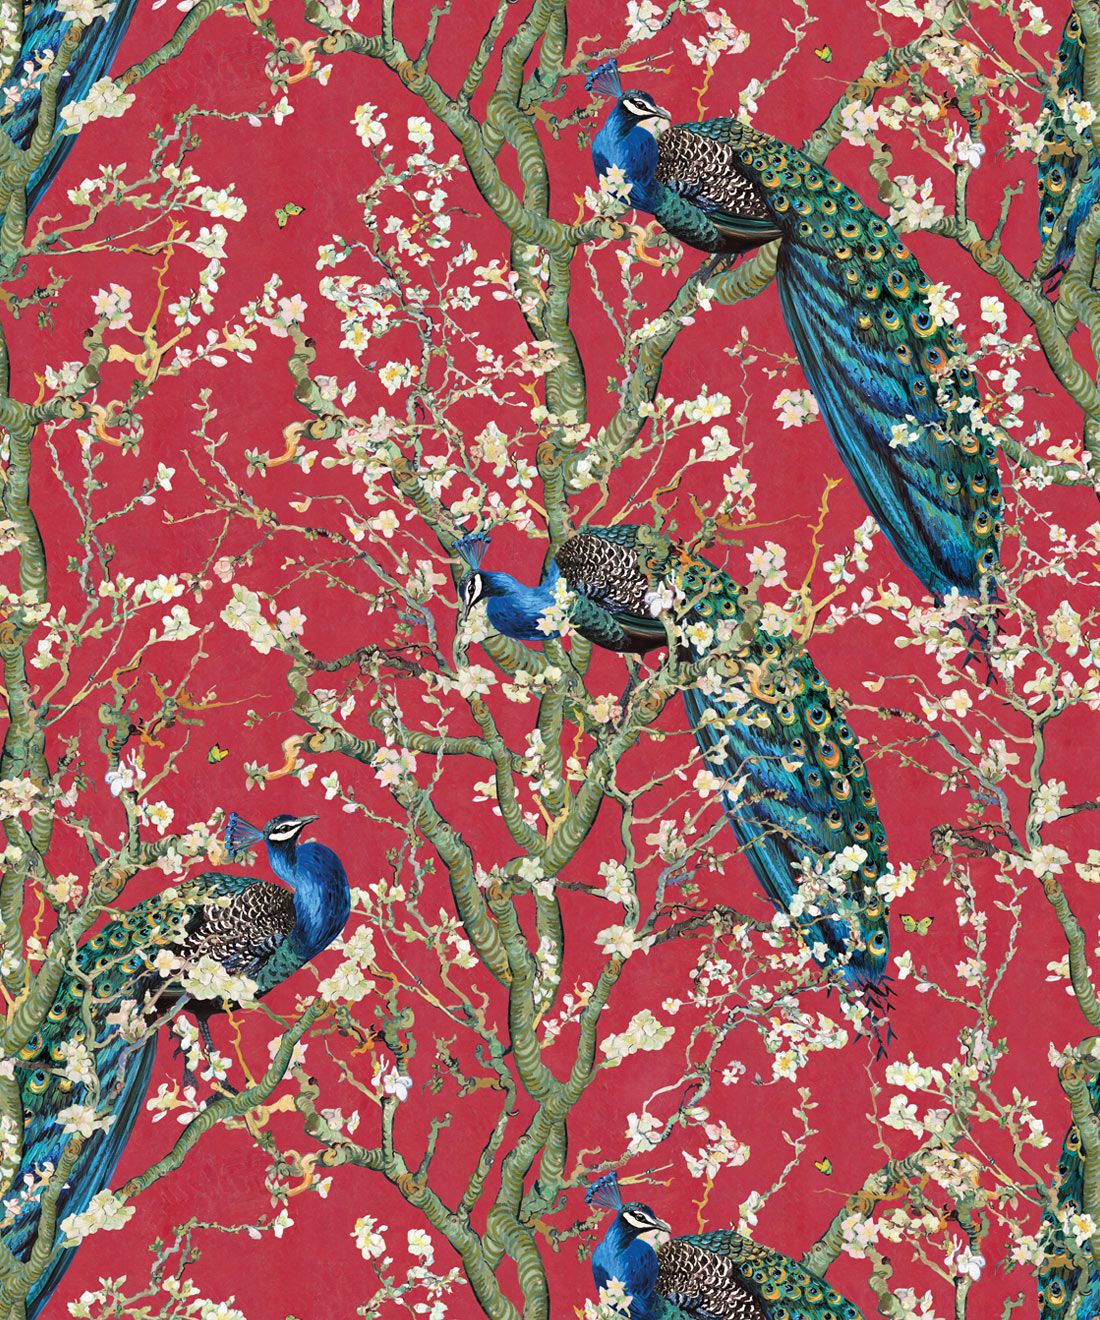 Almond Blossom Wallpaper • Chinoiserie Wallpaper • Wallpaper with Peacocks • Red Lantern Wallpaper • Swatch